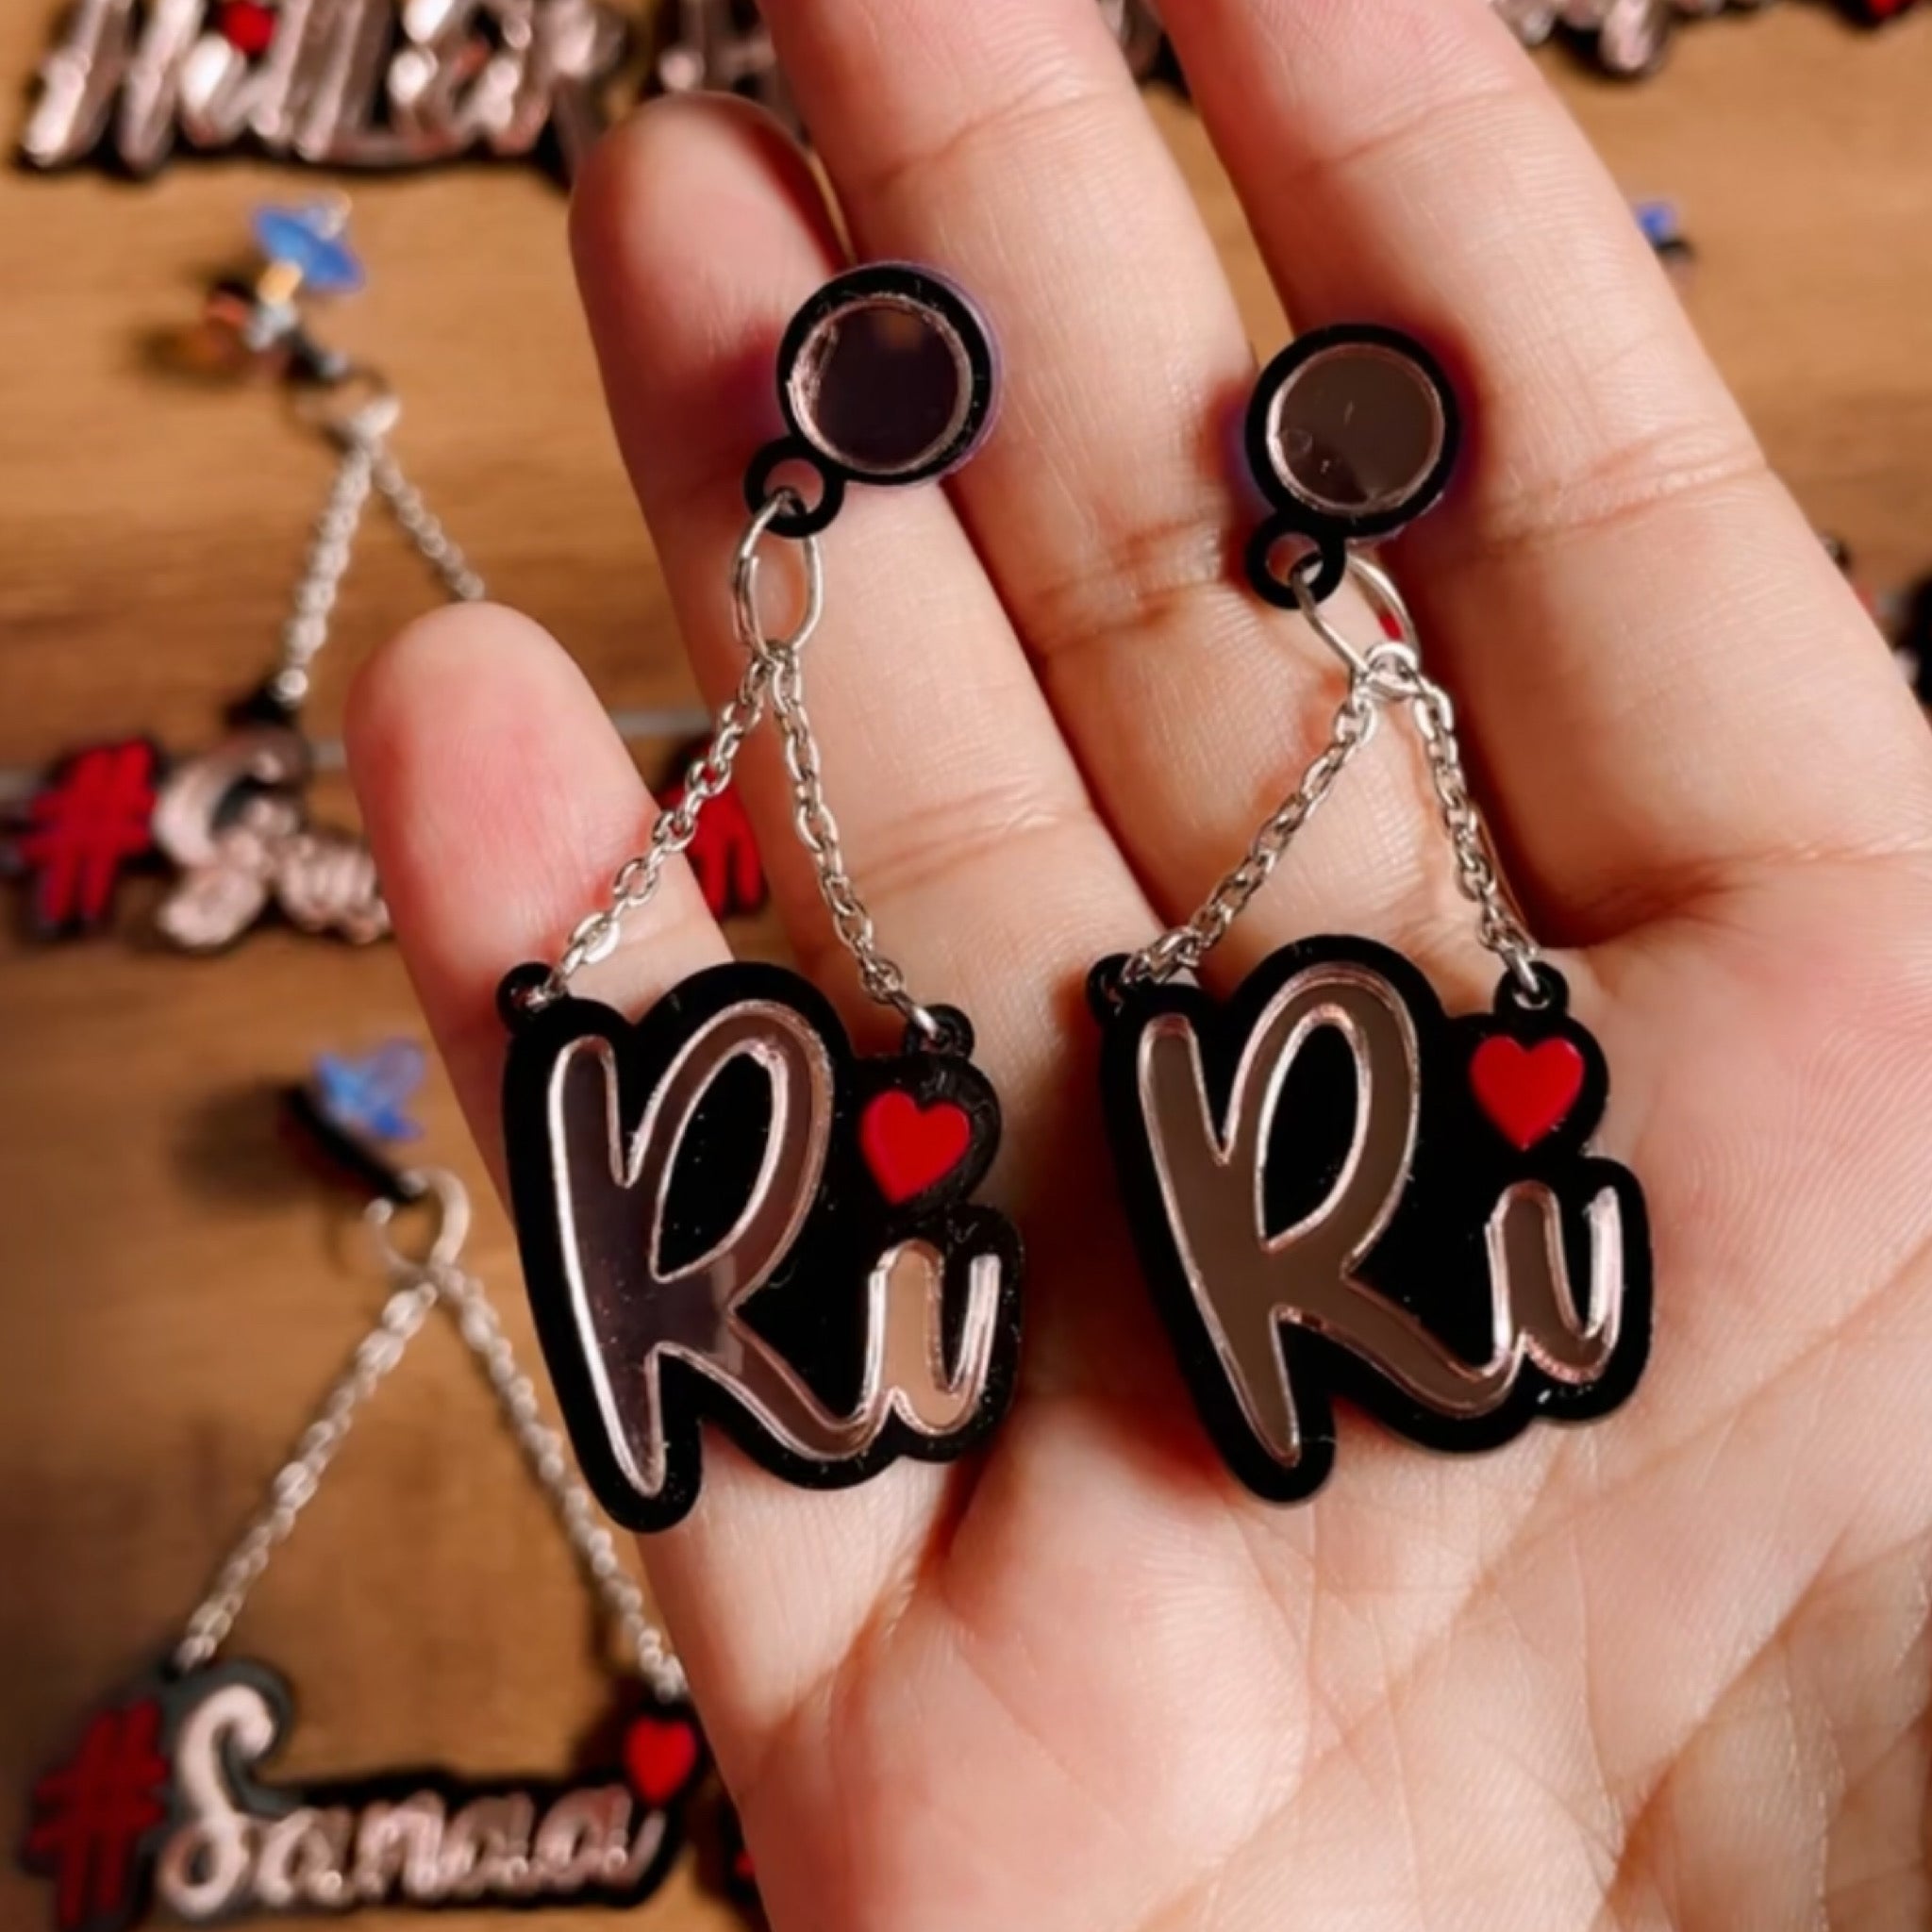 Customised Alphabet Earrings - personalised with a text - "Ri" - red and rose gold - Nian by Nidhi - in a brown background